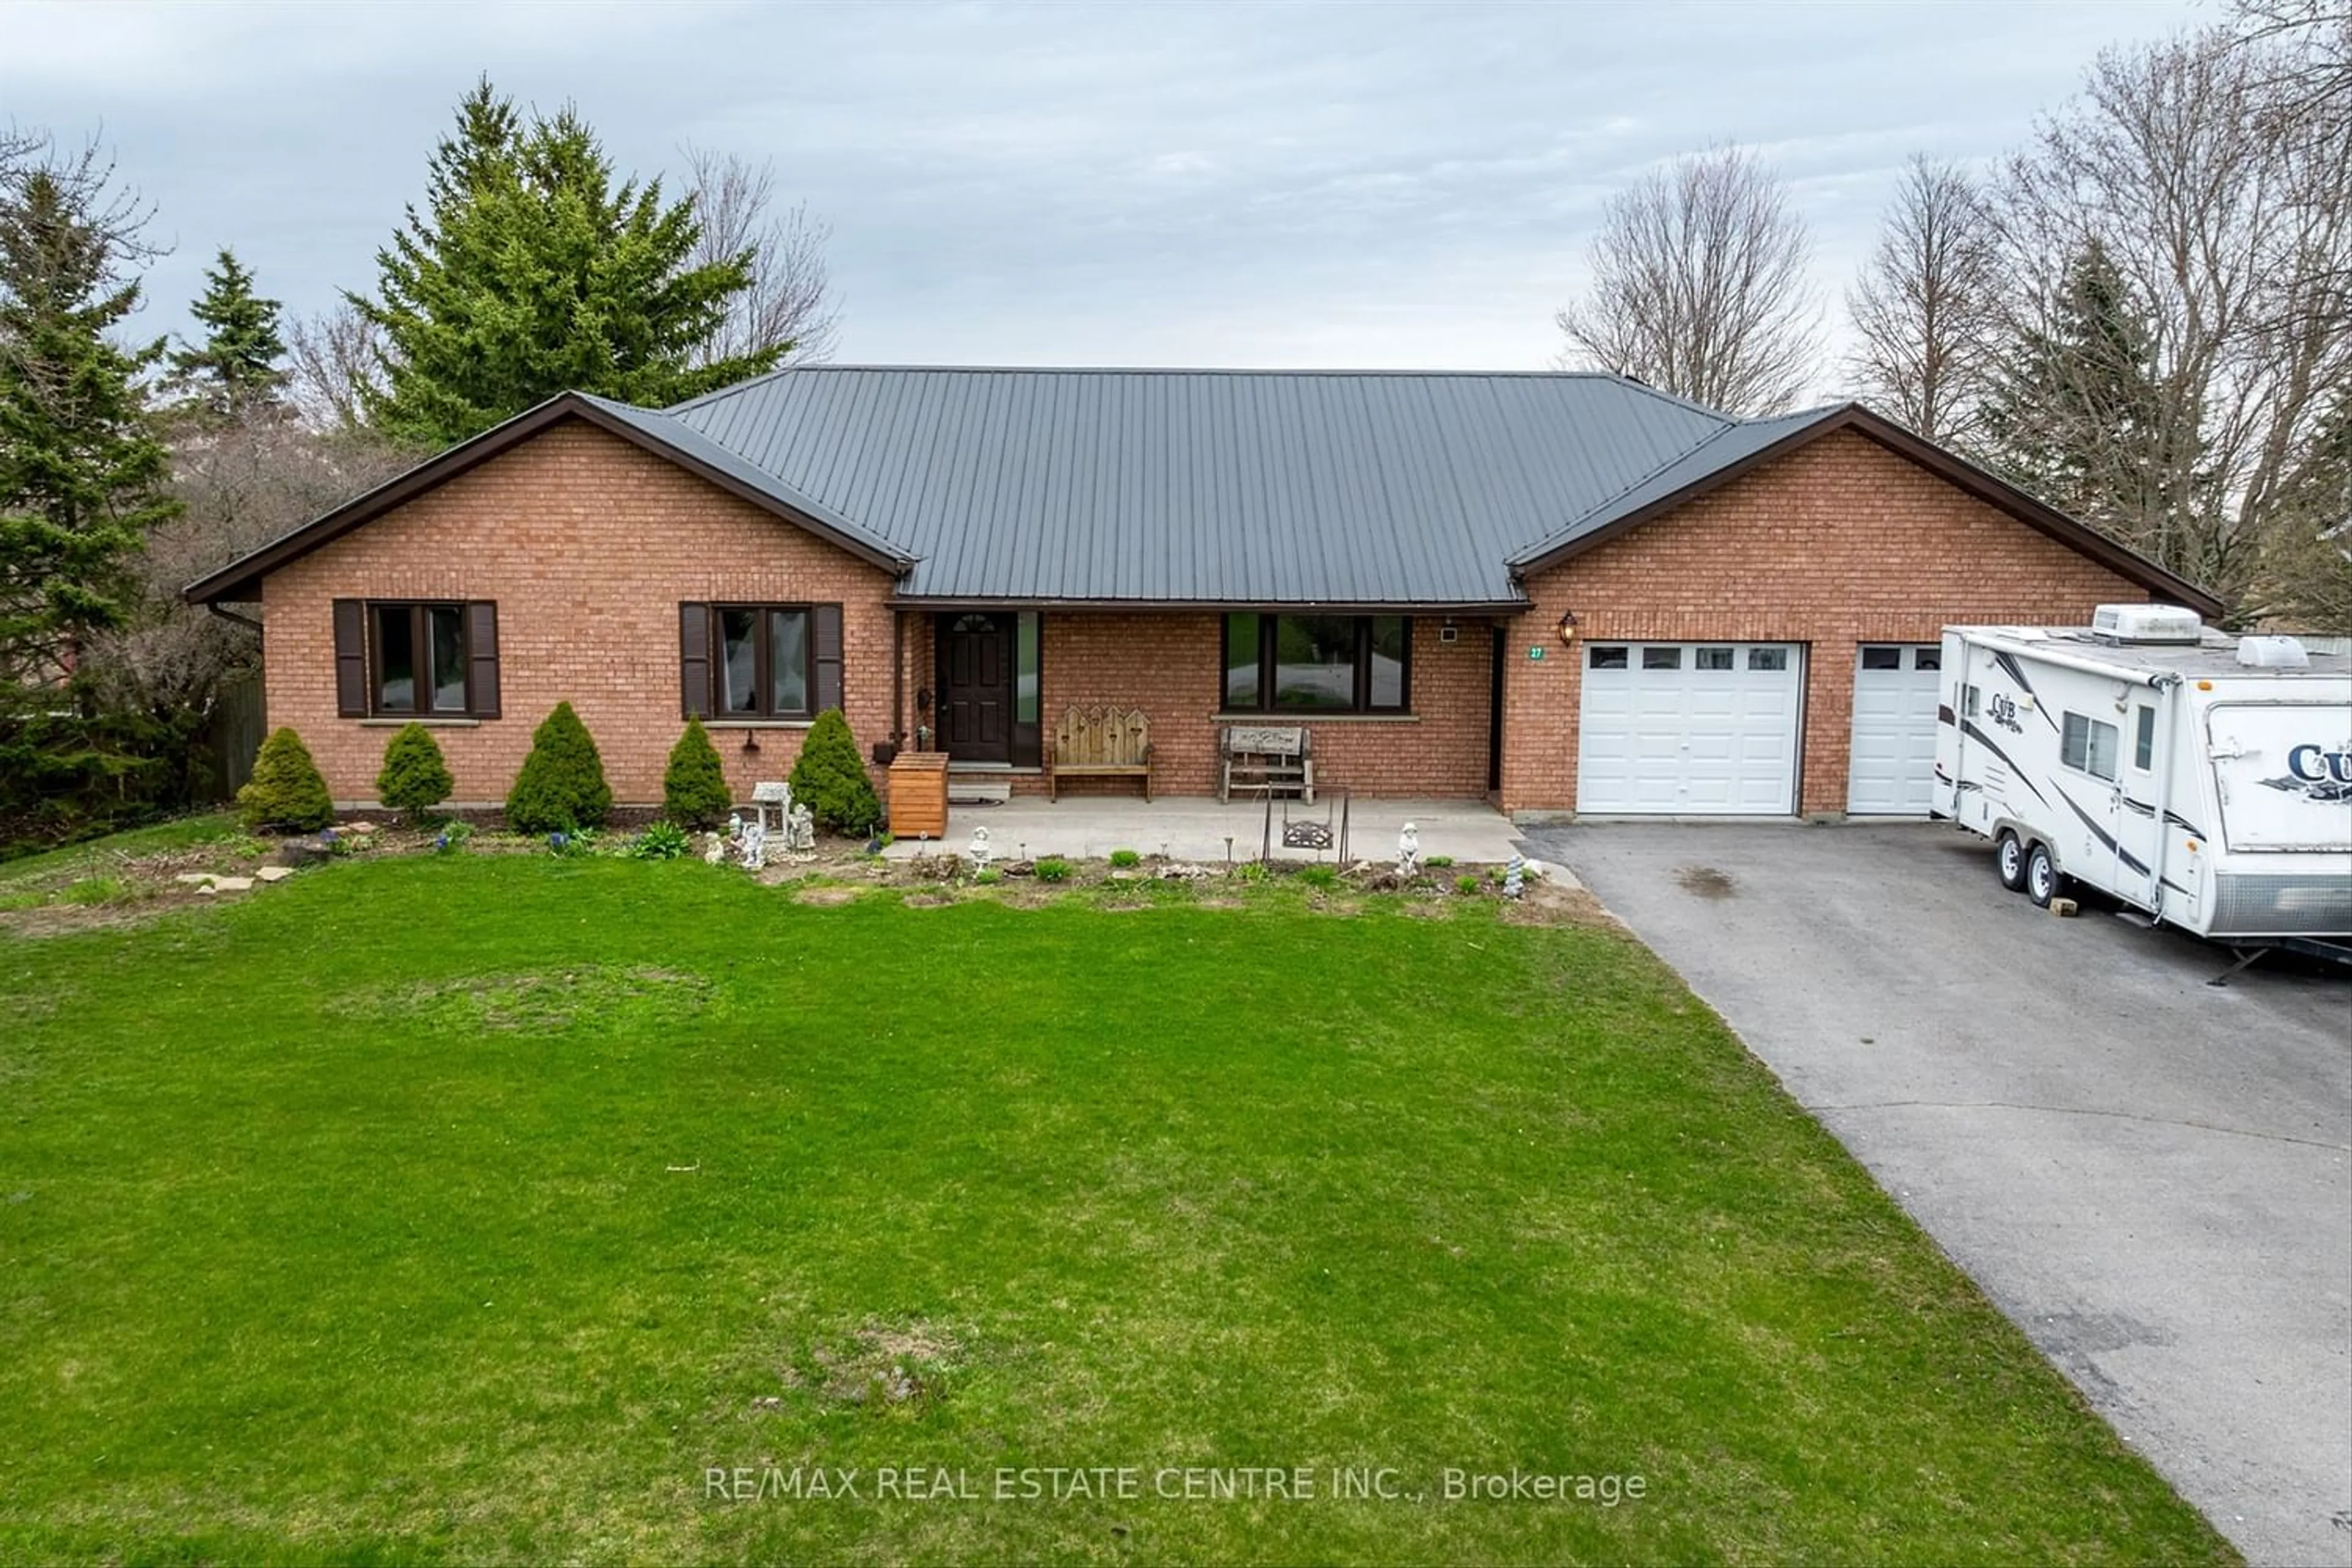 Home with brick exterior material for 27 Bruce St, Kawartha Lakes Ontario K0M 2N0